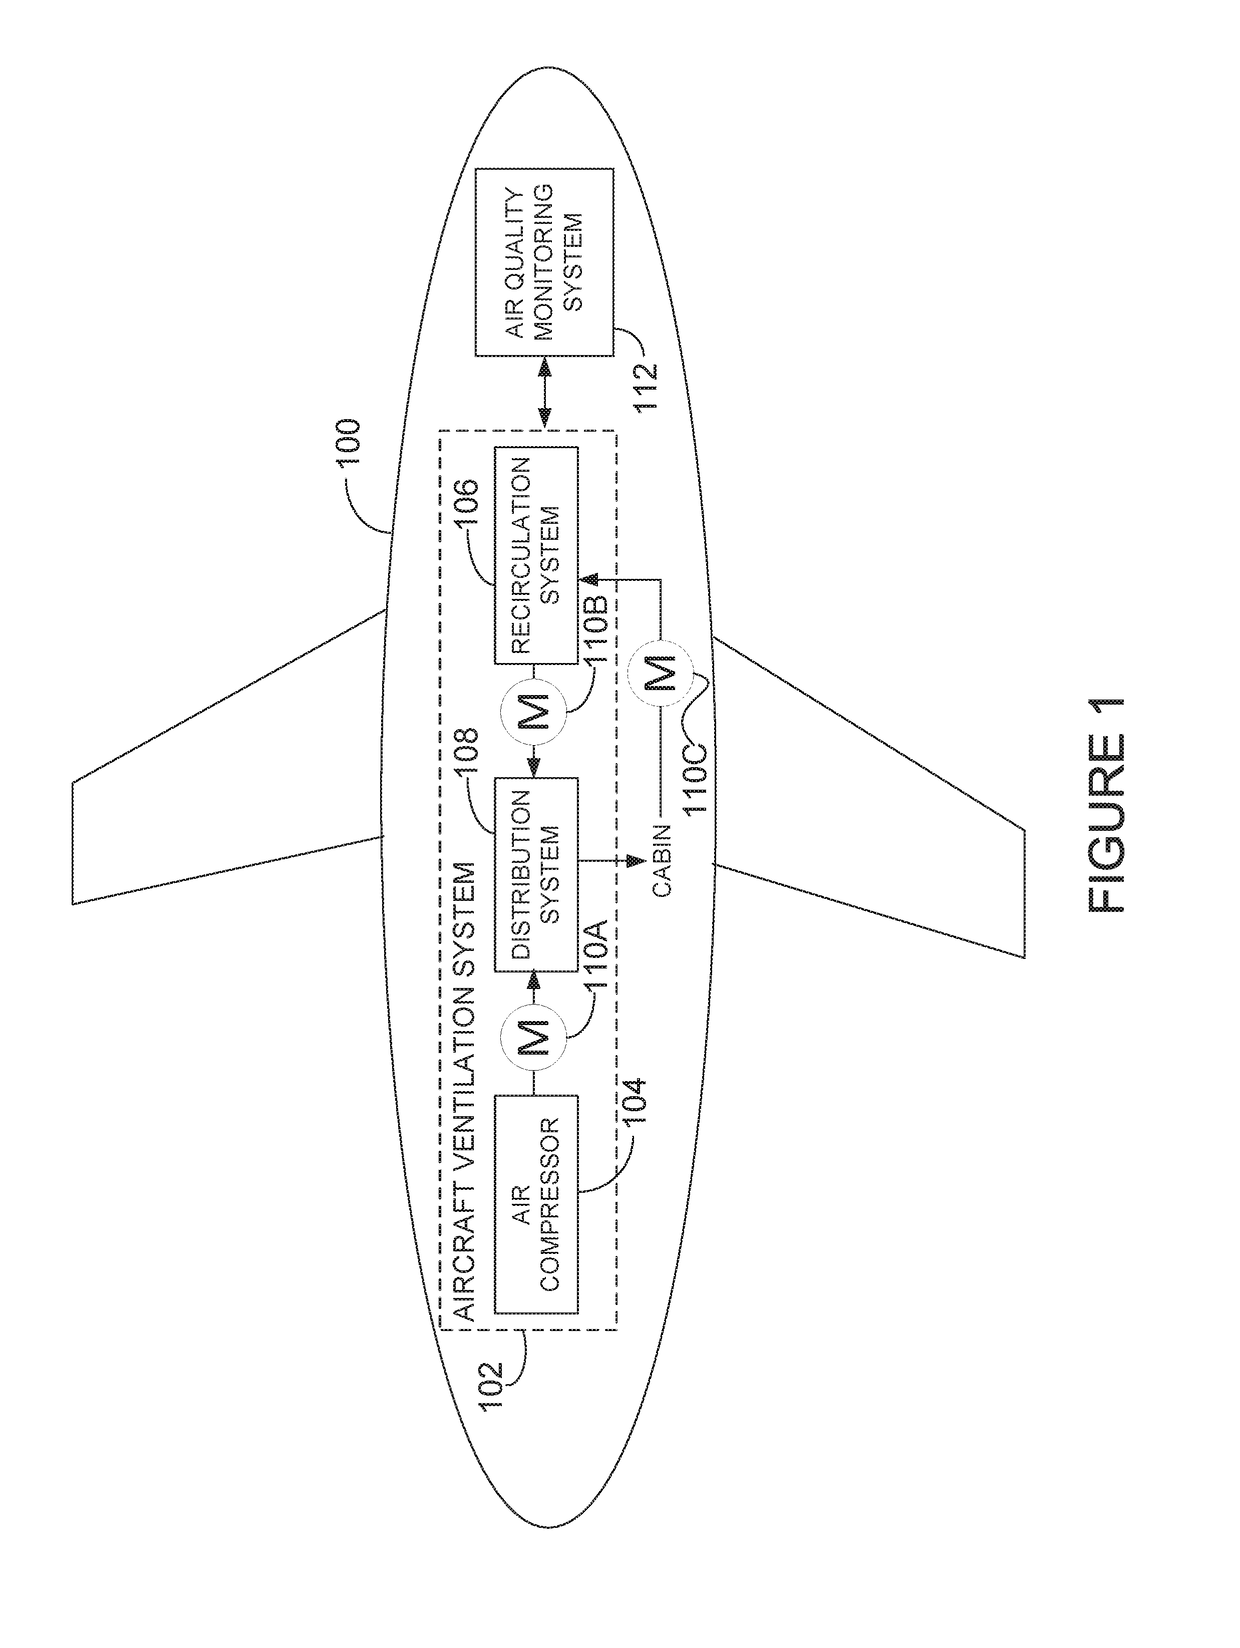 Aircraft air quality monitoring system and method